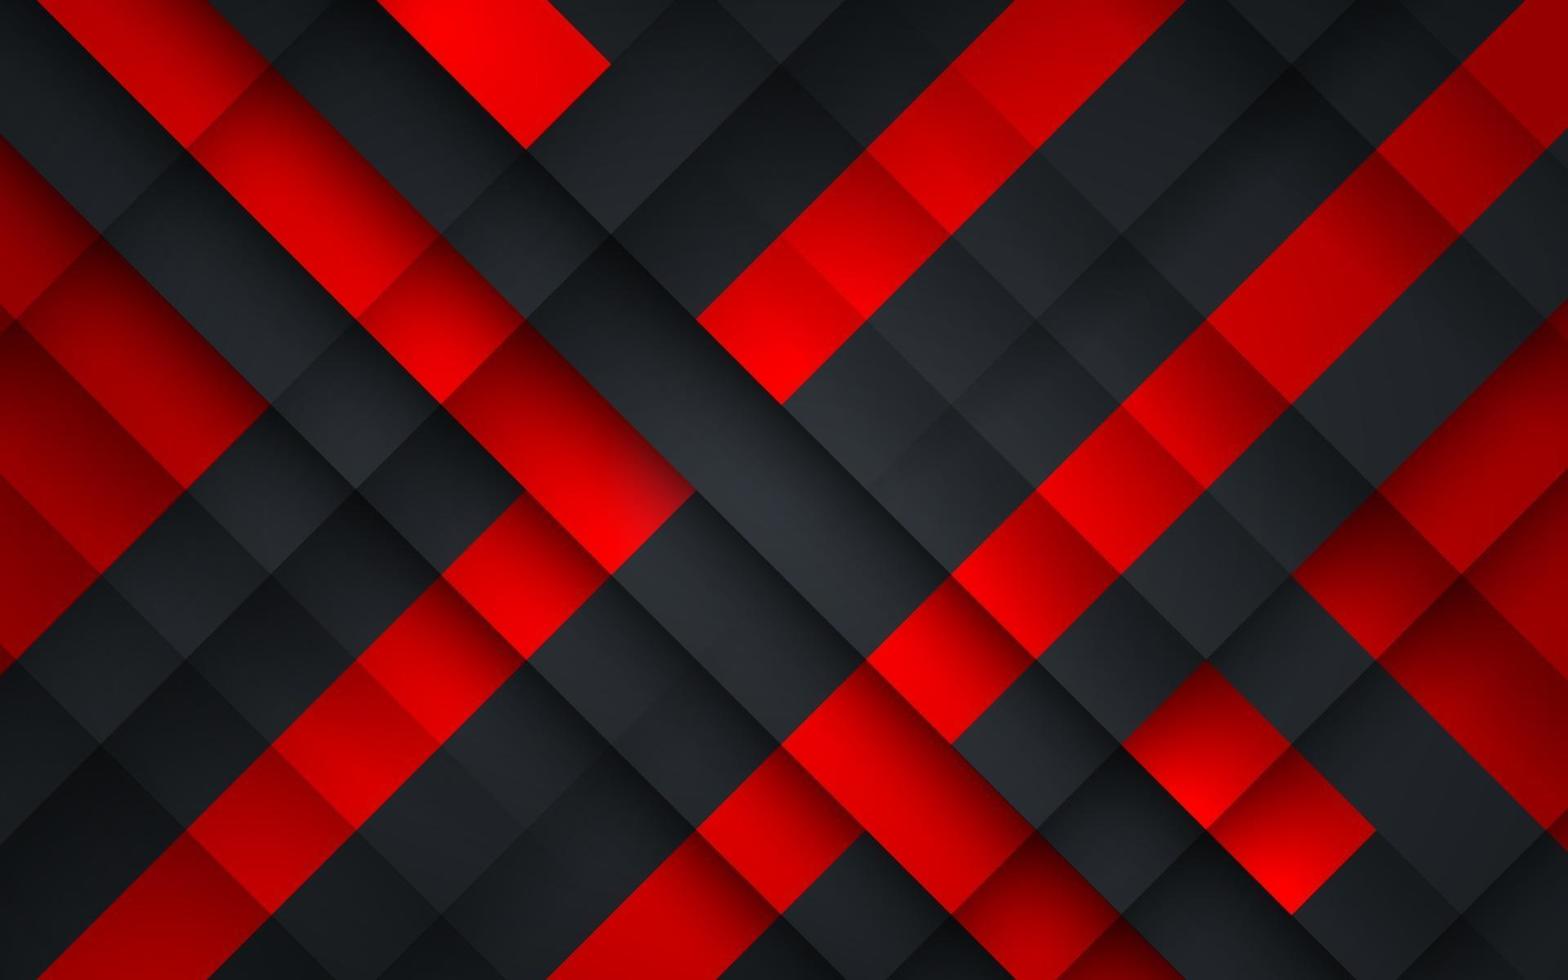 Abstract geometric pattern red and black background. Modern technology design. Vector illustration